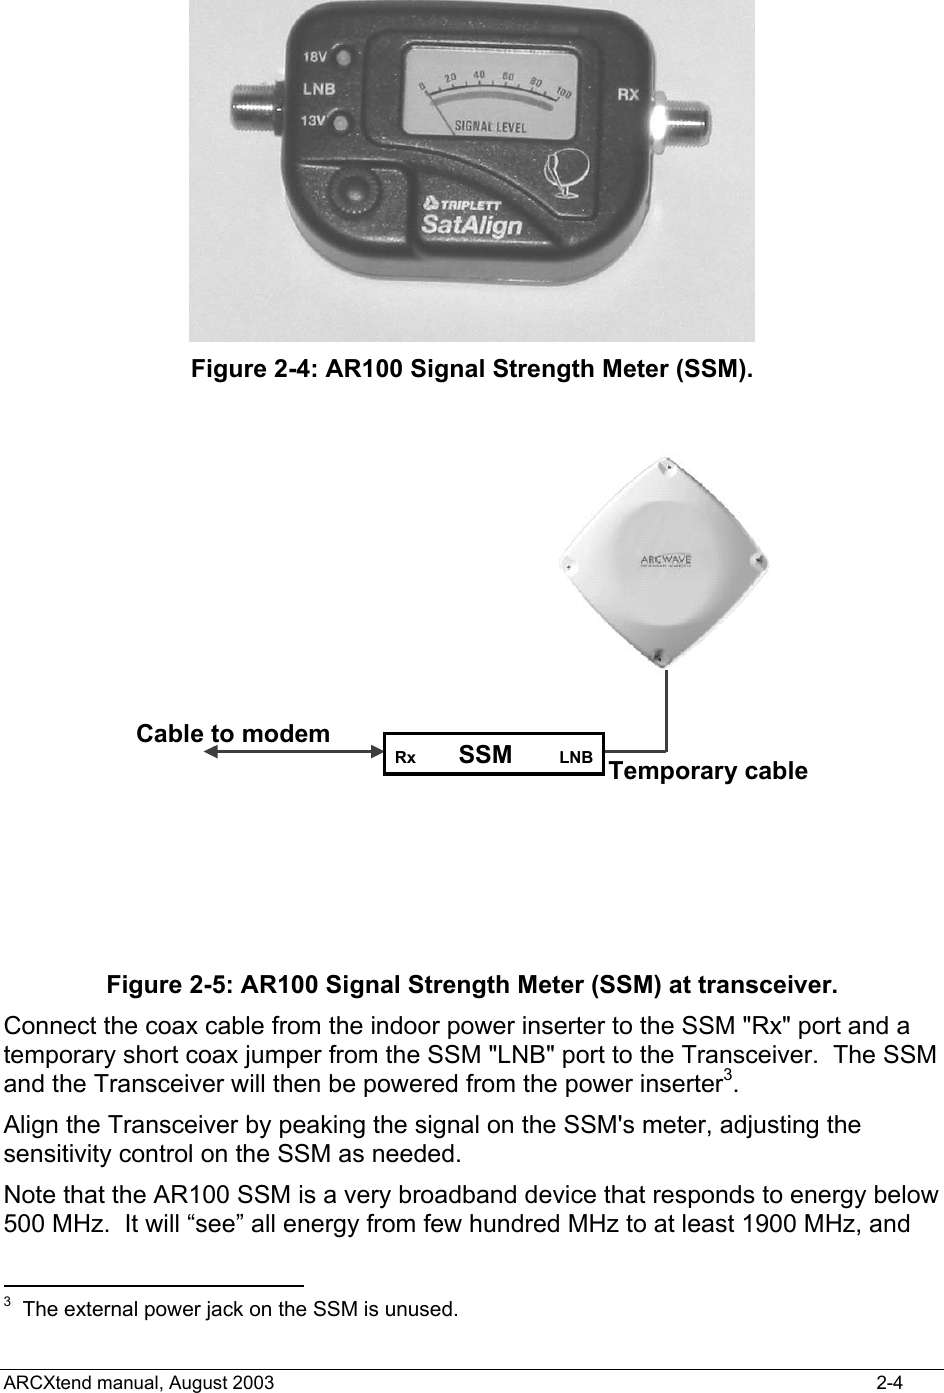   Figure 2-4: AR100 Signal Strength Meter (SSM). Rx  SSM LNBCable to modemTemporary cable Figure 2-5: AR100 Signal Strength Meter (SSM) at transceiver. Connect the coax cable from the indoor power inserter to the SSM &quot;Rx&quot; port and a temporary short coax jumper from the SSM &quot;LNB&quot; port to the Transceiver.  The SSM and the Transceiver will then be powered from the power inserter3.   Align the Transceiver by peaking the signal on the SSM&apos;s meter, adjusting the sensitivity control on the SSM as needed.  Note that the AR100 SSM is a very broadband device that responds to energy below 500 MHz.  It will “see” all energy from few hundred MHz to at least 1900 MHz, and                                             3  The external power jack on the SSM is unused. ARCXtend manual, August 2003    2-4 